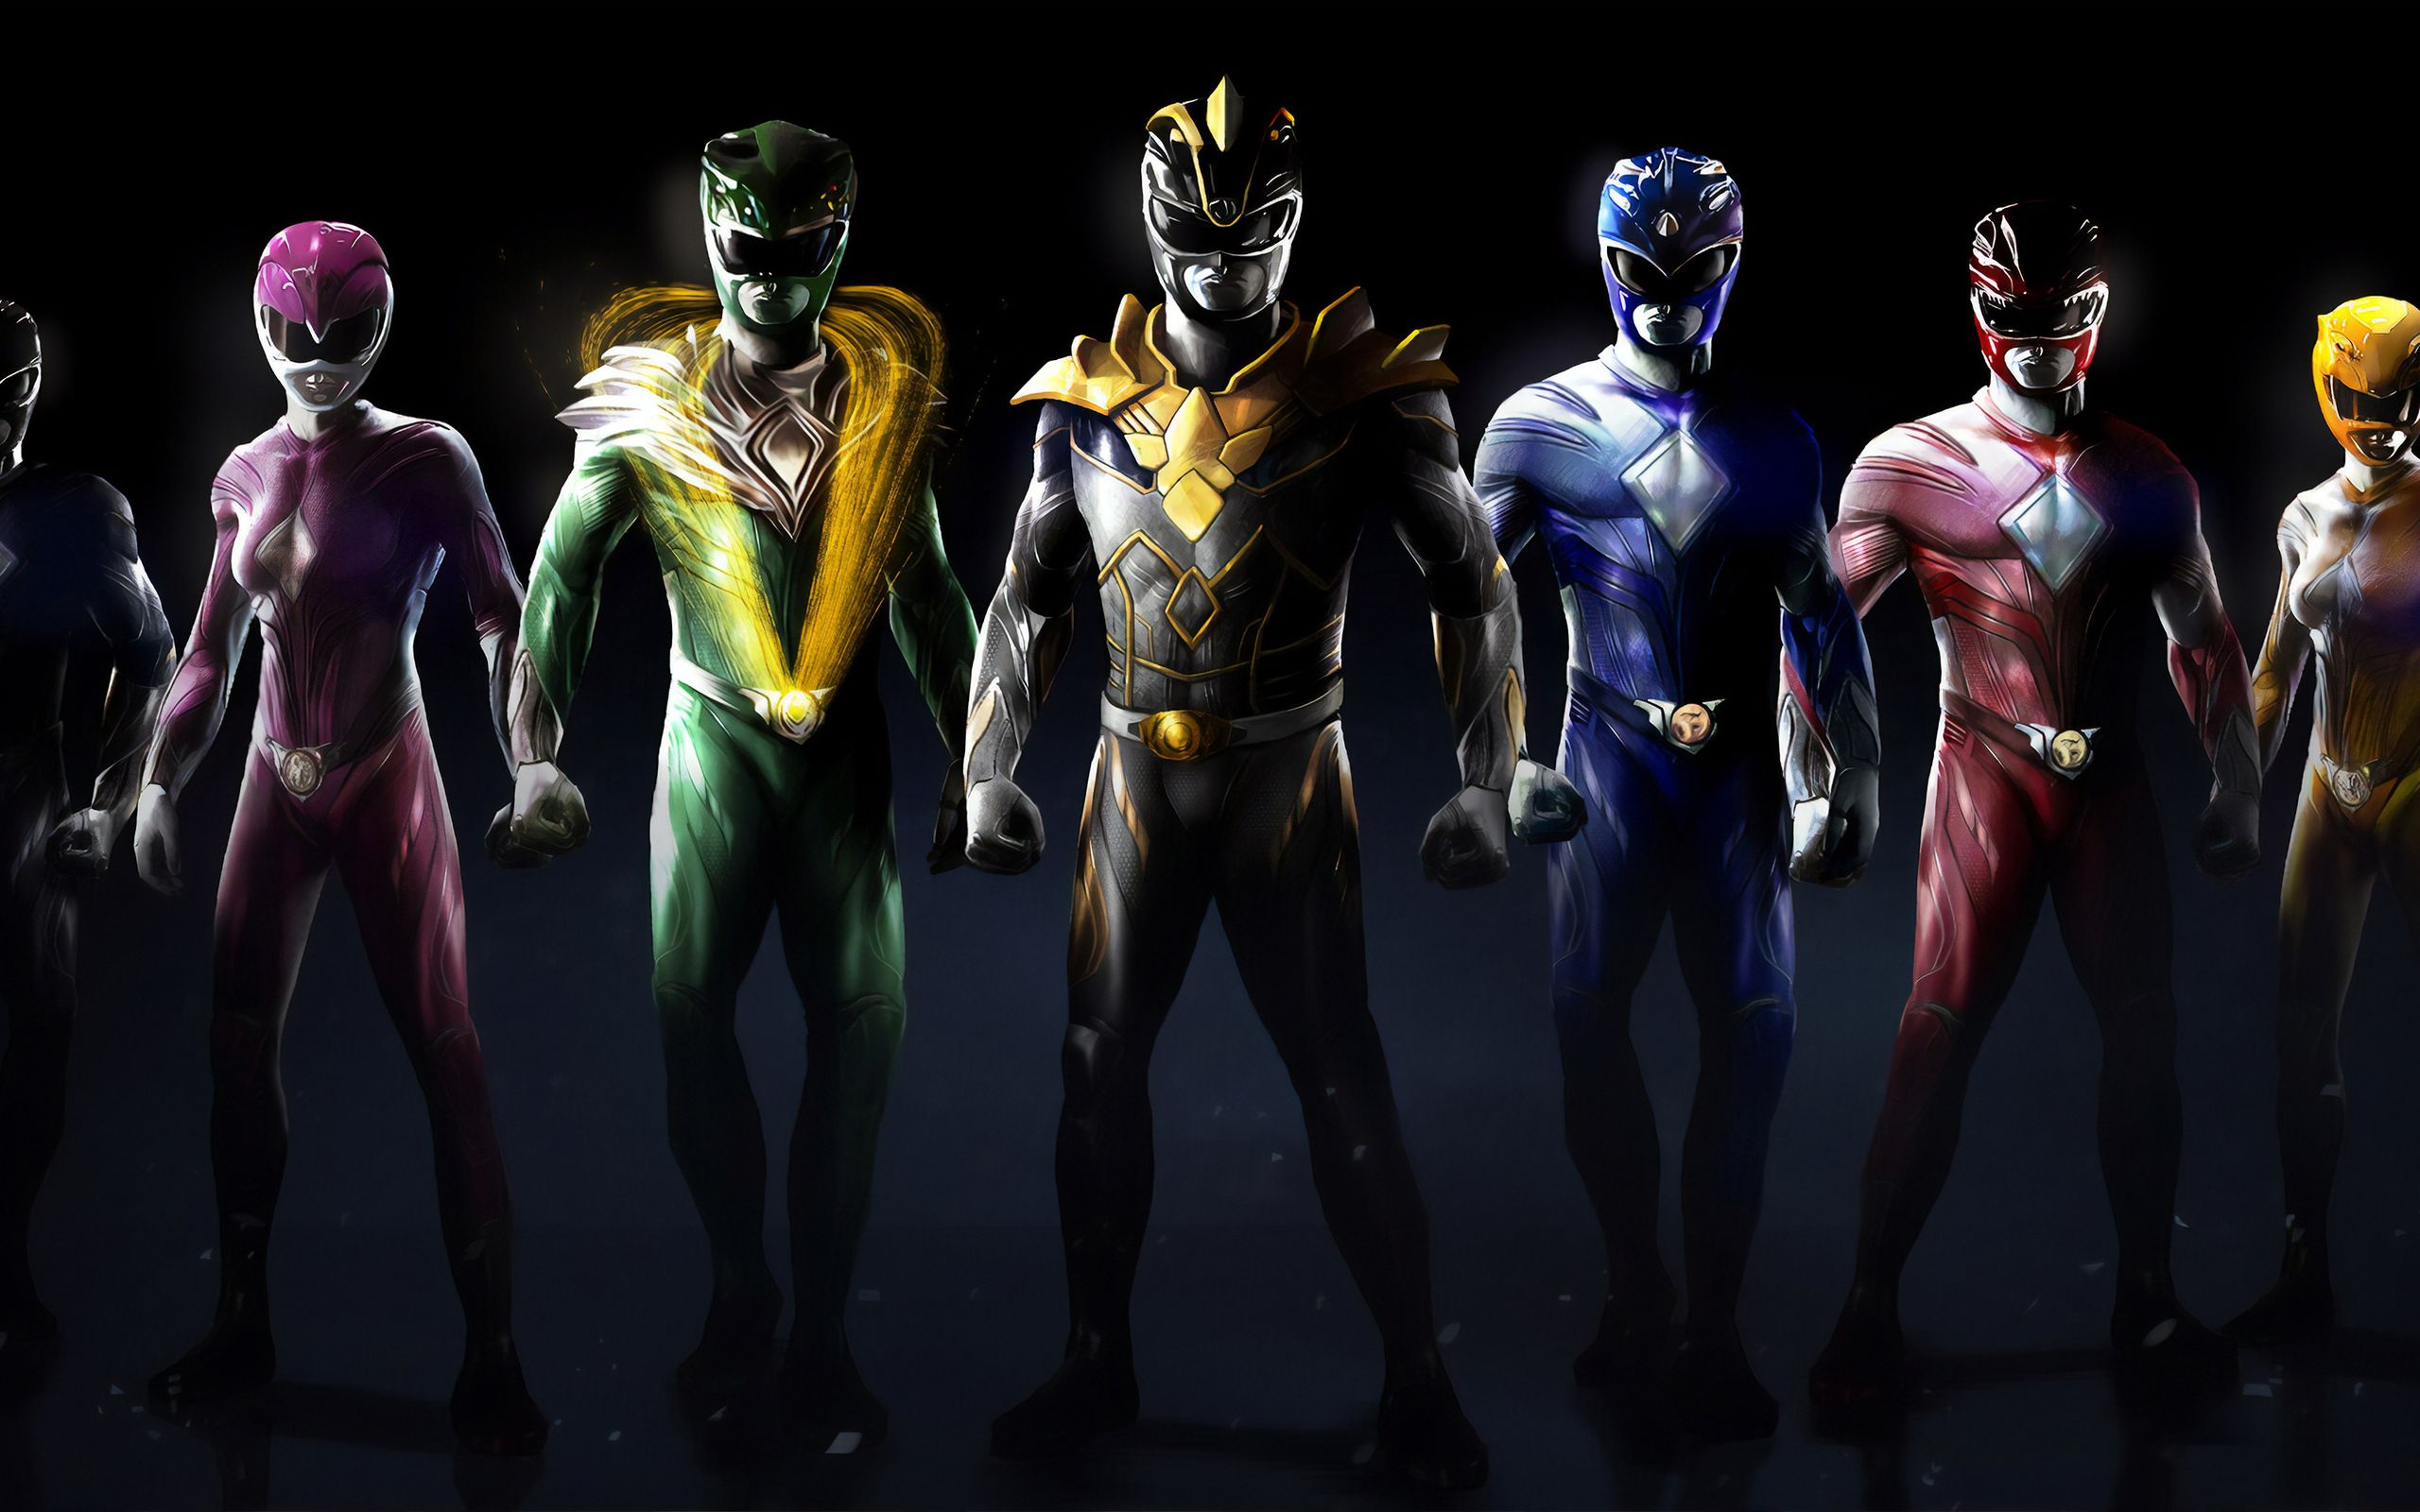 2560x1600 All Power Rangers 4k 2560x1600 Resolution HD 4k Wallpapers, Image...